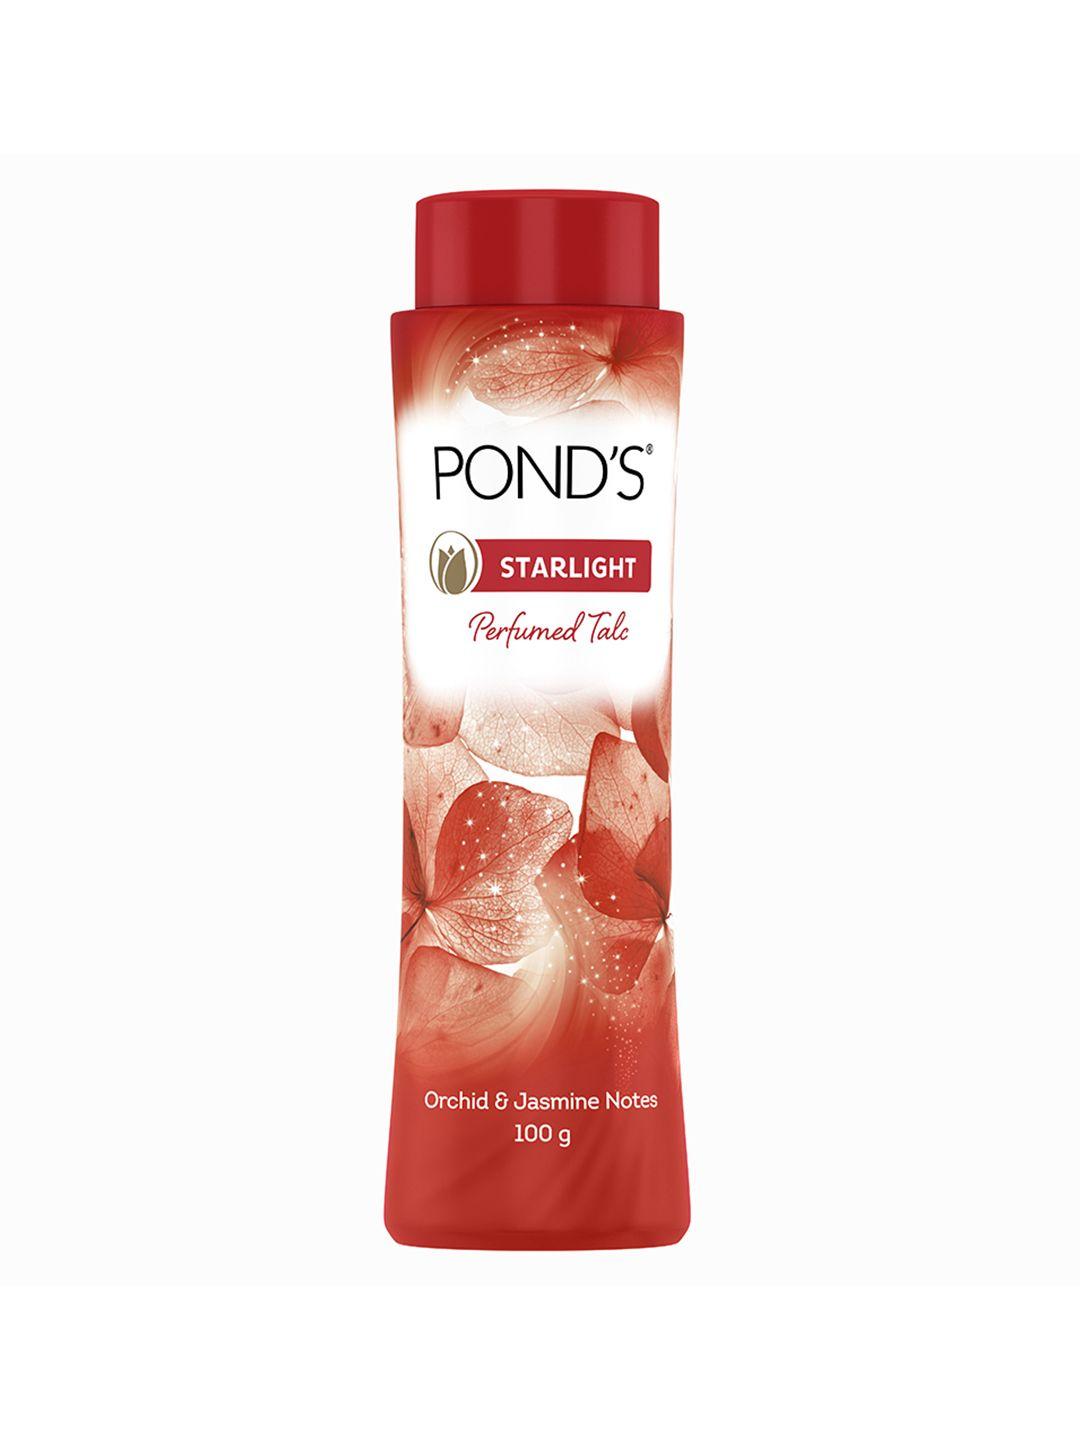 ponds starlight perfumed talc with orchid & jasmine notes - 100 g